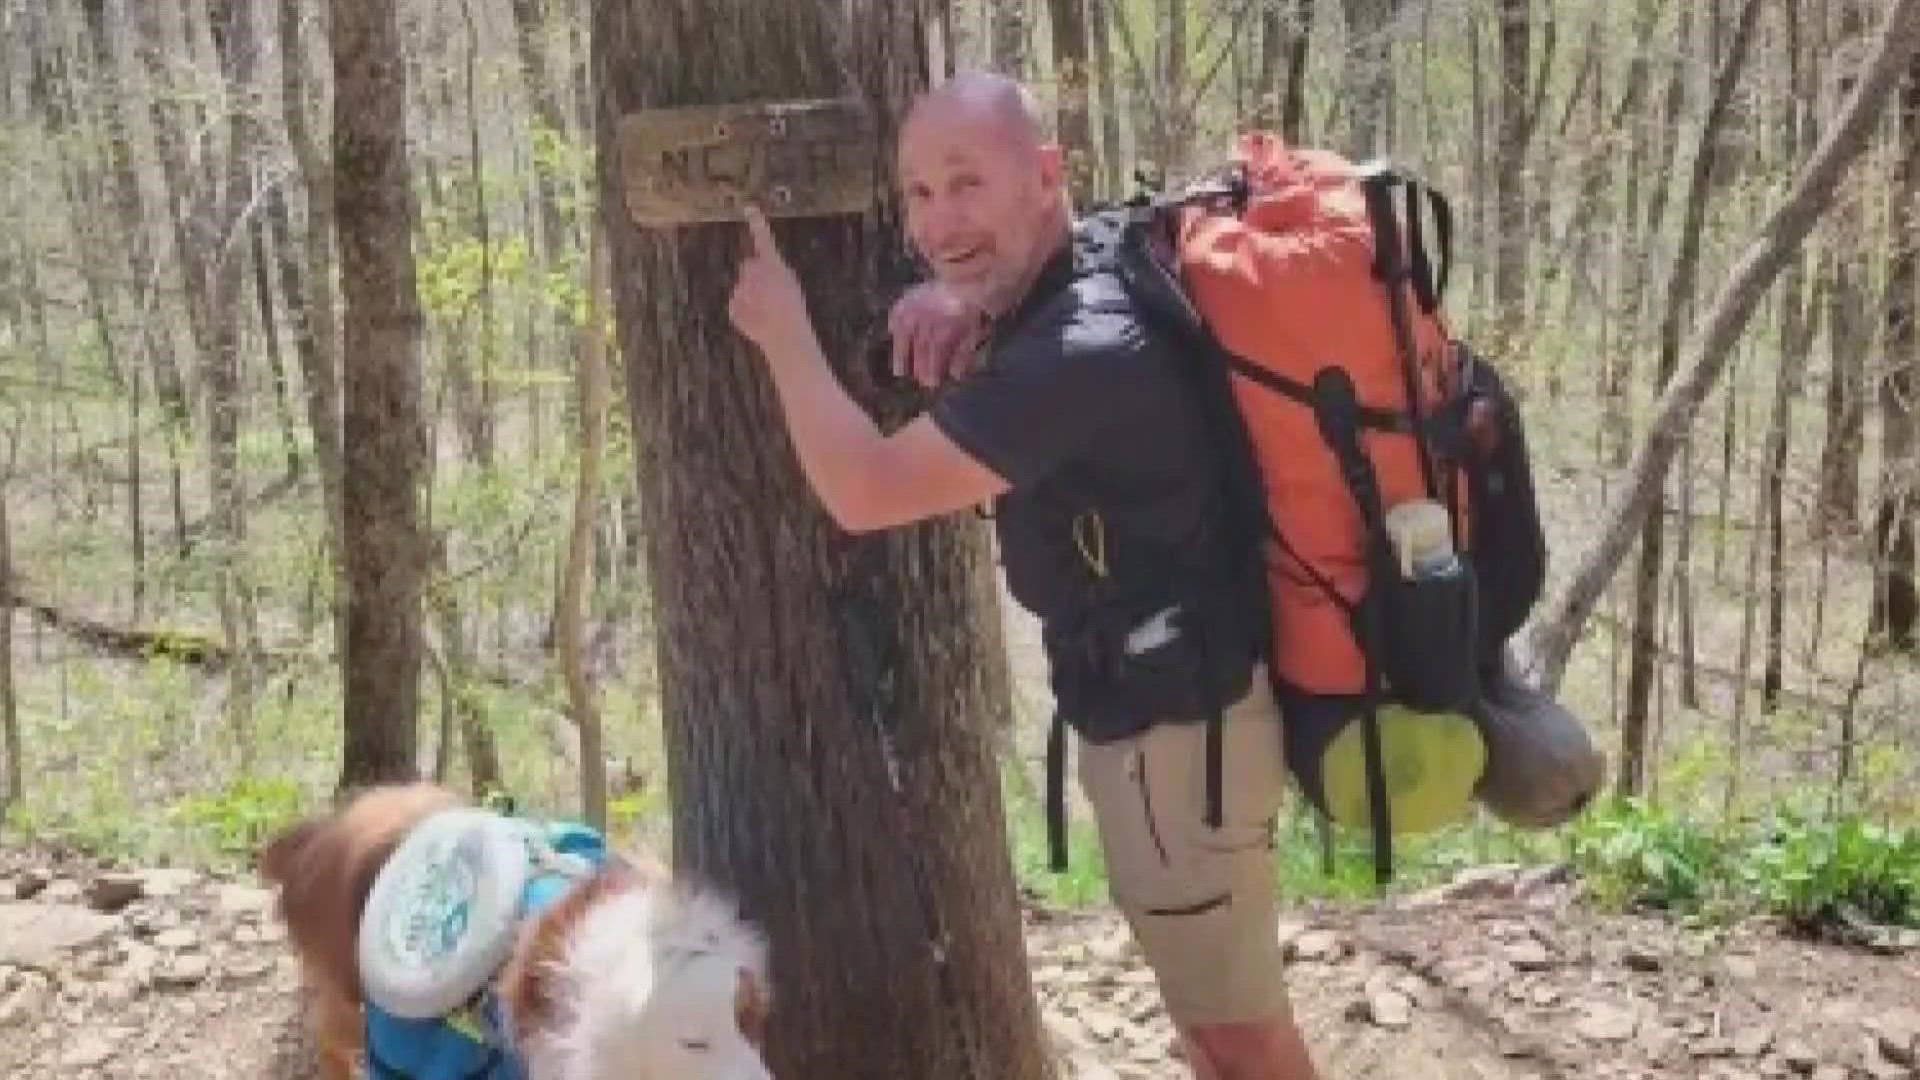 Guy Pilote set out on the Appalachian Trail alone in April, and has since traveled more than 1,500 miles on his journey so far.